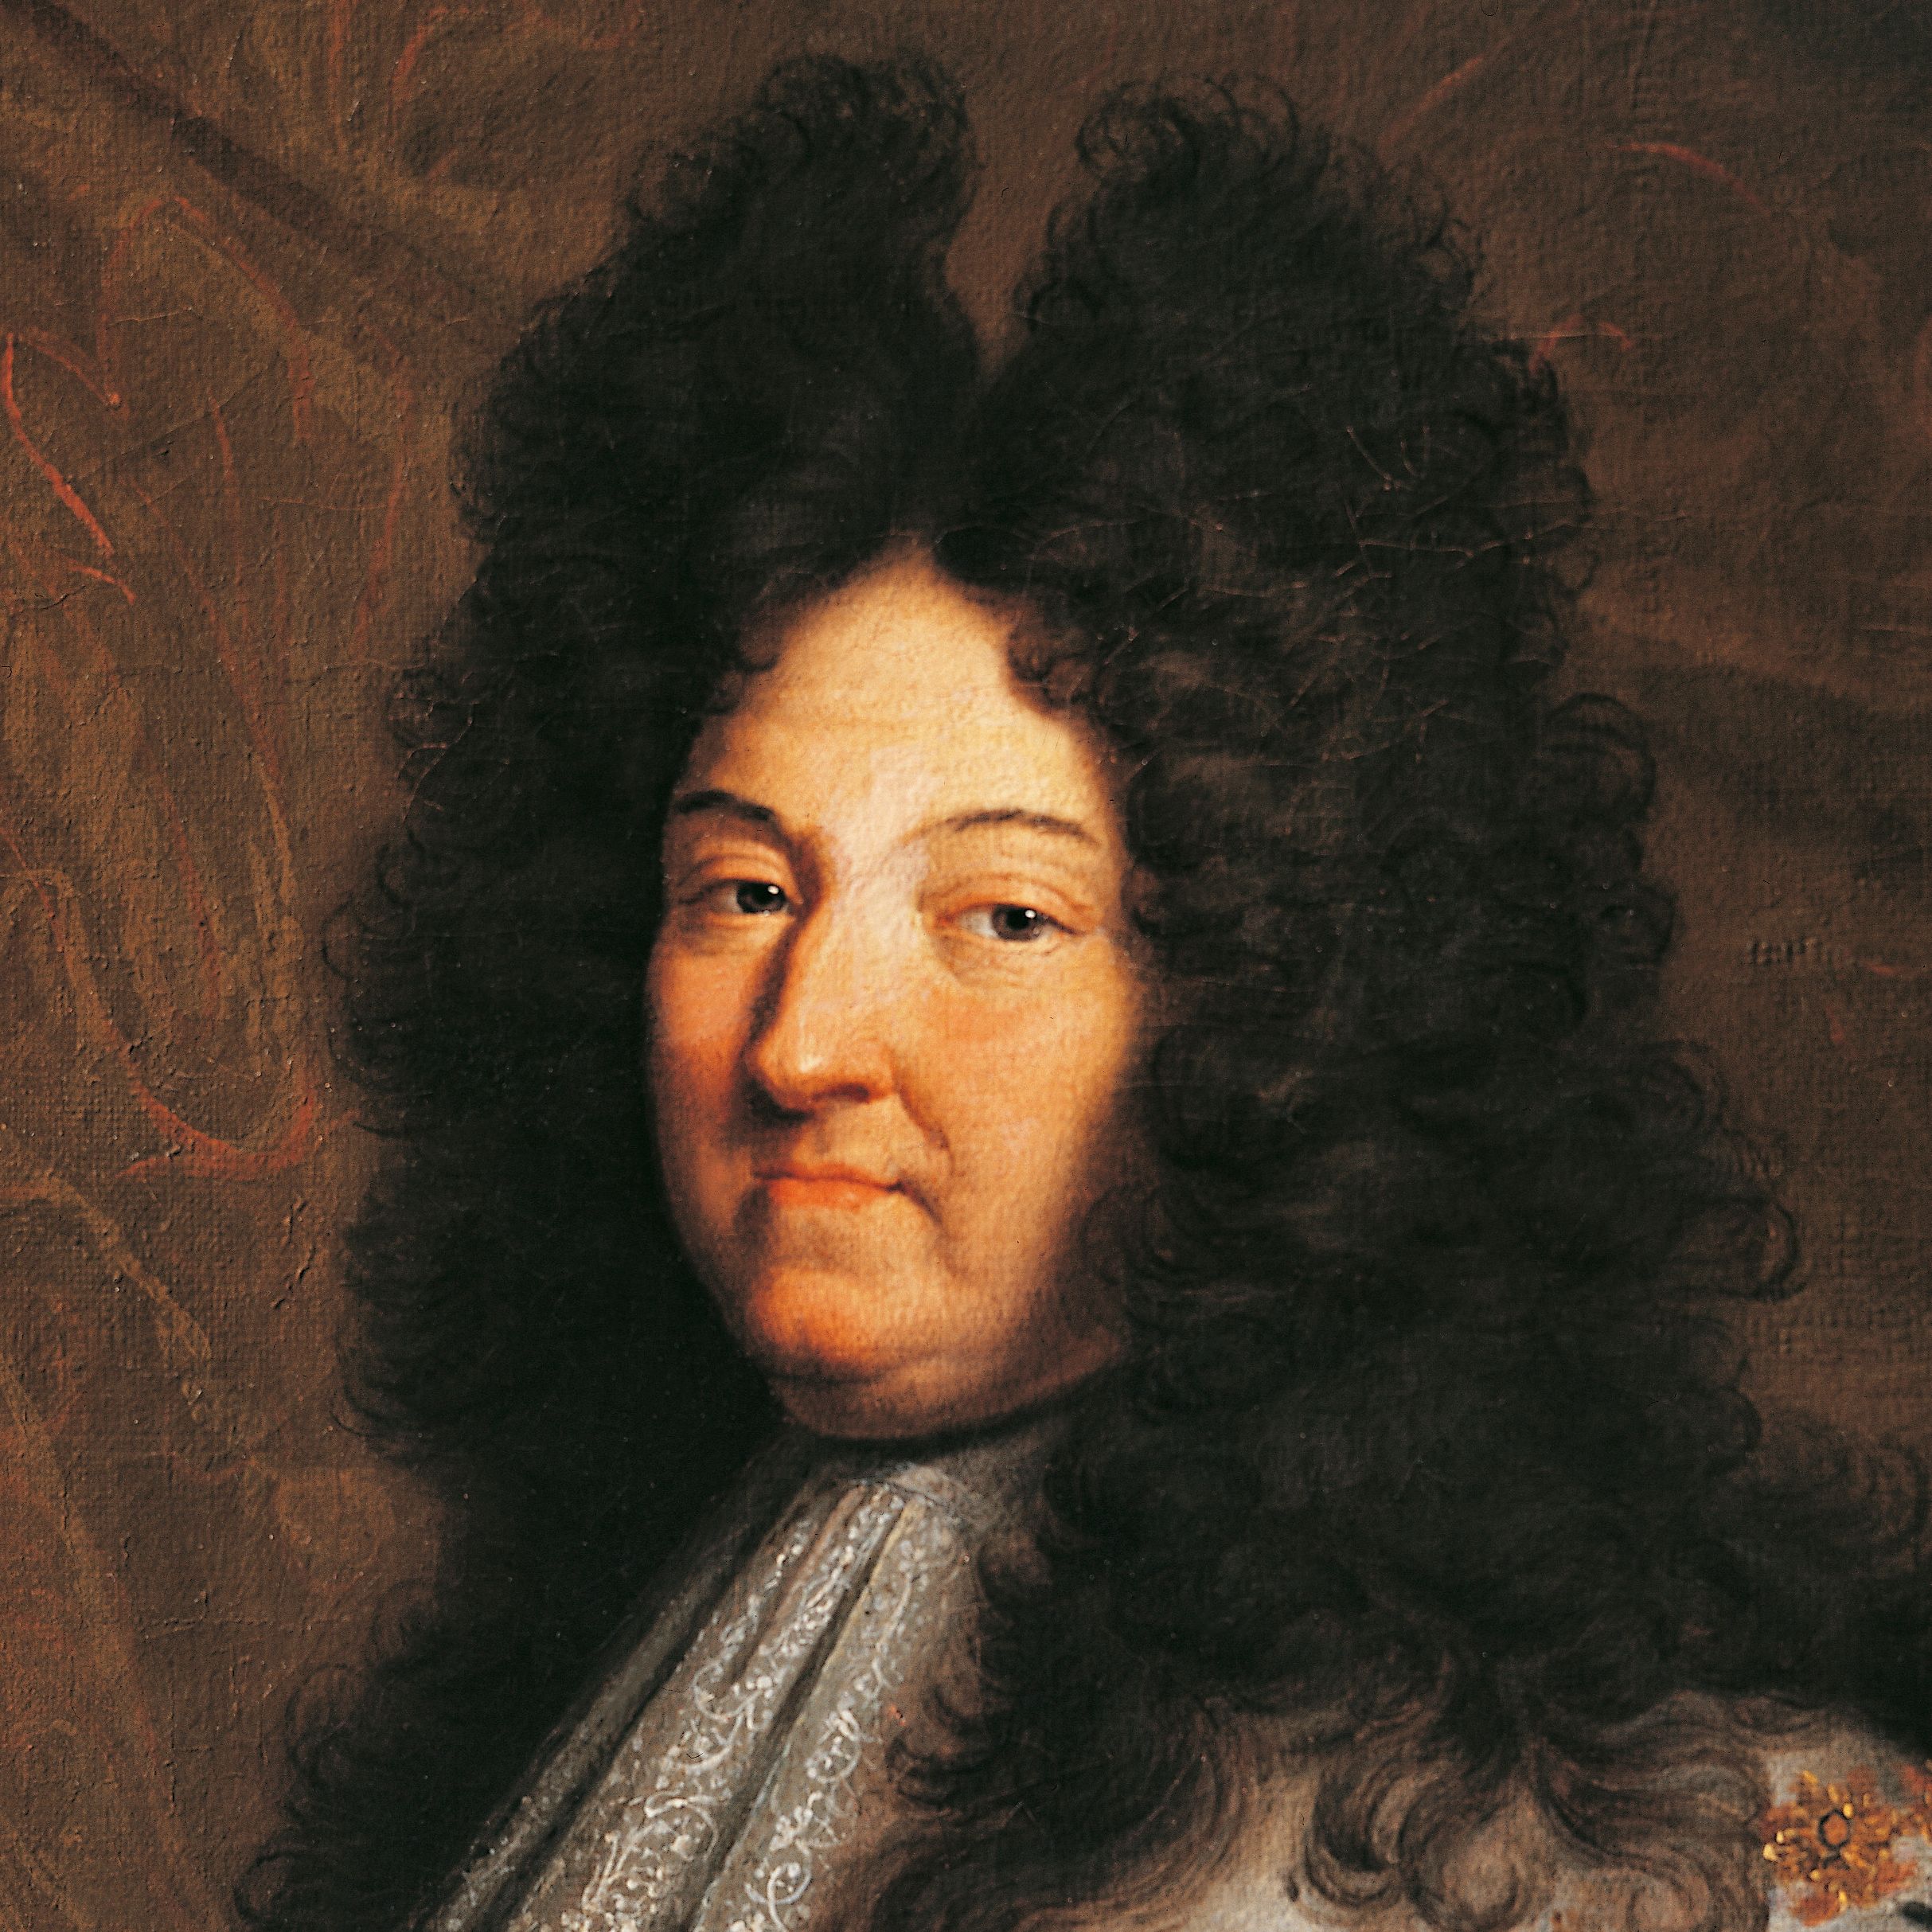 how did Louis XIV's absolutism shape modern monarchies